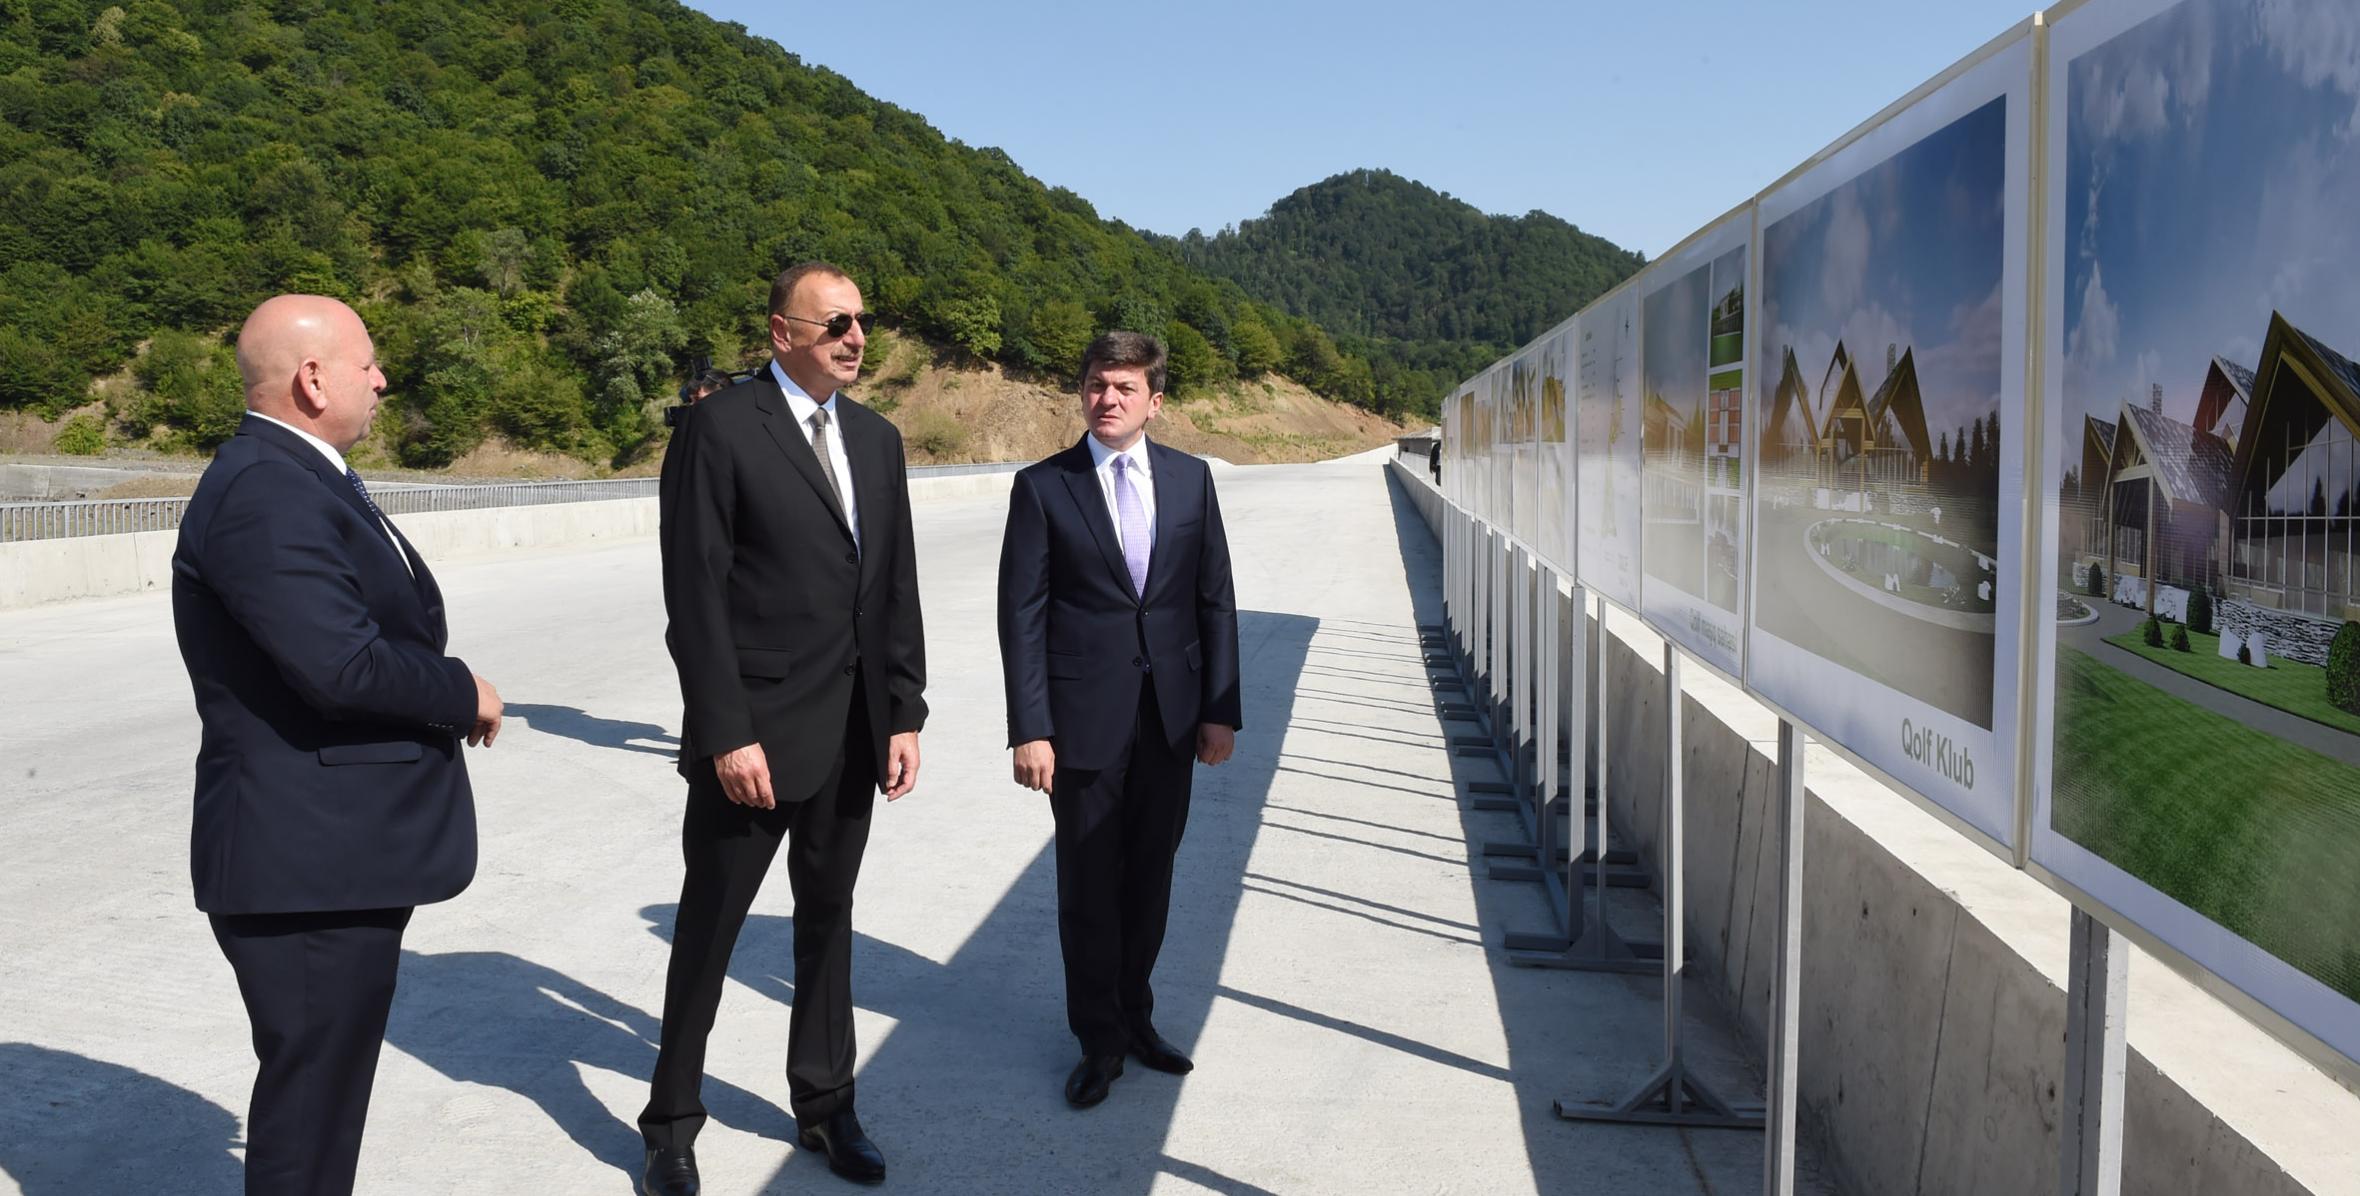 Ilham Aliyev viewed tourism and sport infrastructure projects underway in Qabala